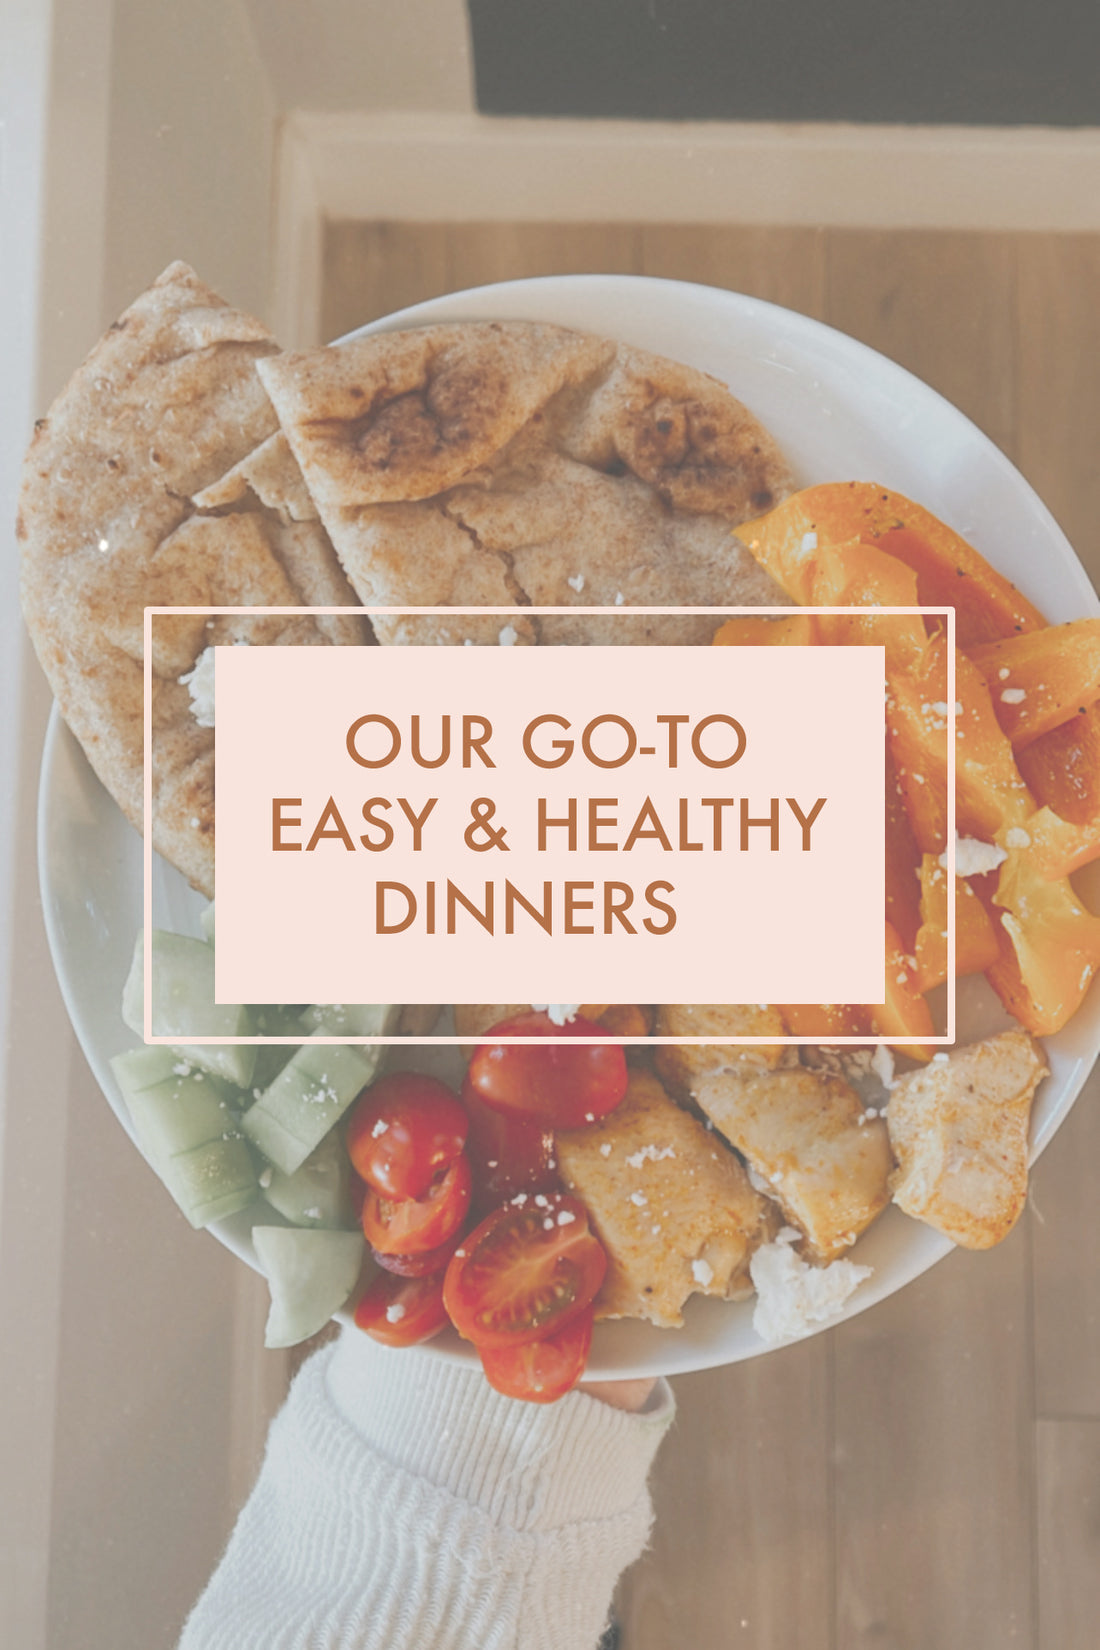 Our Go-To Easy & Healthy Dinners